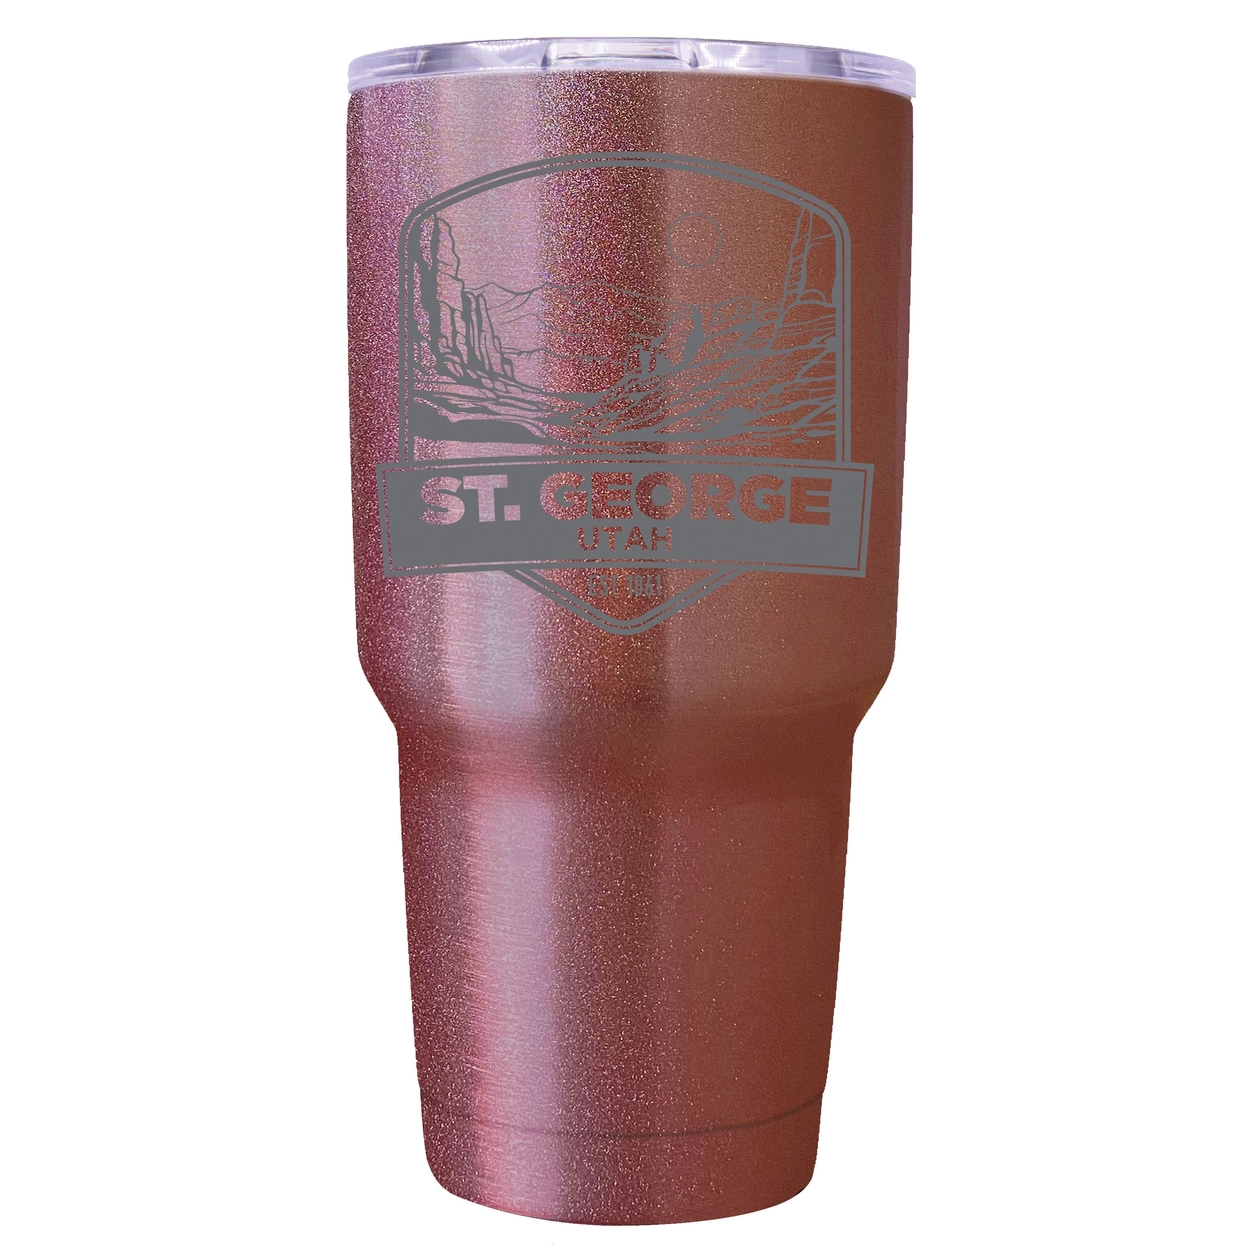 St. George Utah Souvenir 24 Oz Engraved Insulated Stainless Steel Tumbler - Coral,,4-Pack